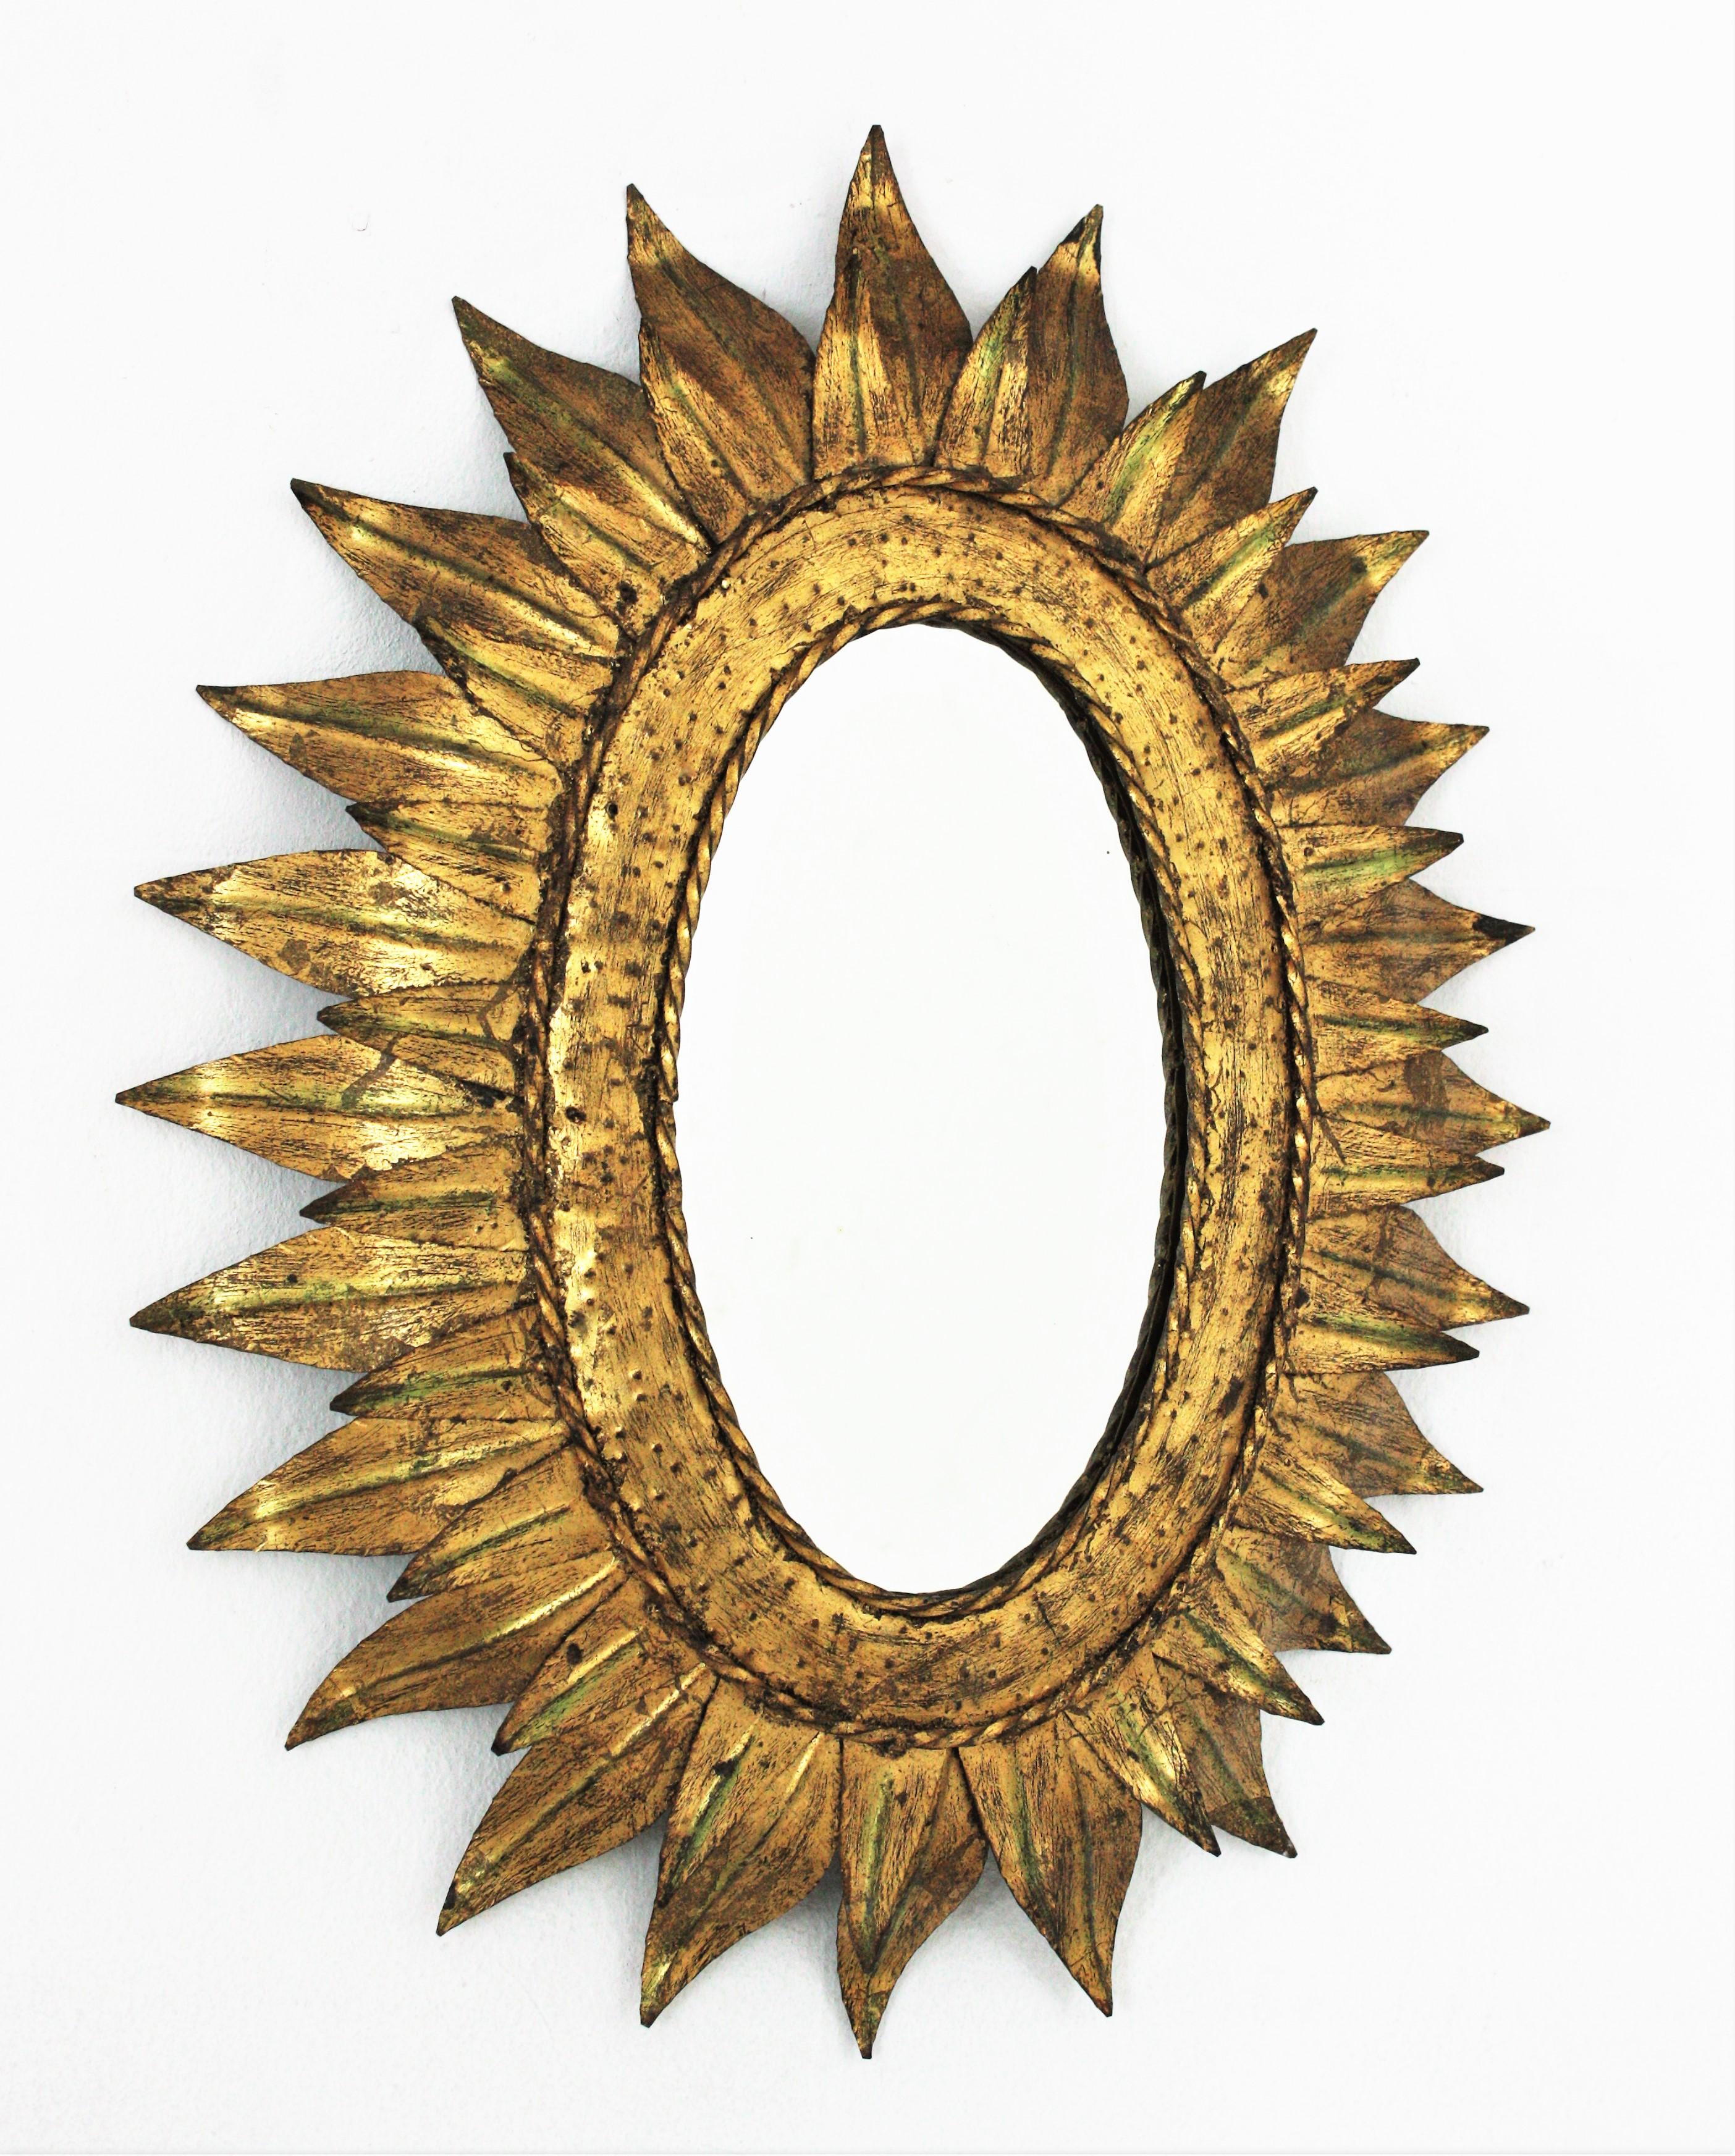 Sunburst oval mirror in gilt metal with double leafed frame, France, 1950s
This hand-hammered iron sunburst wall mirror features double leafed oval frame. It is heavily adorned by the hammer marks at the central part with twisting iron ropes